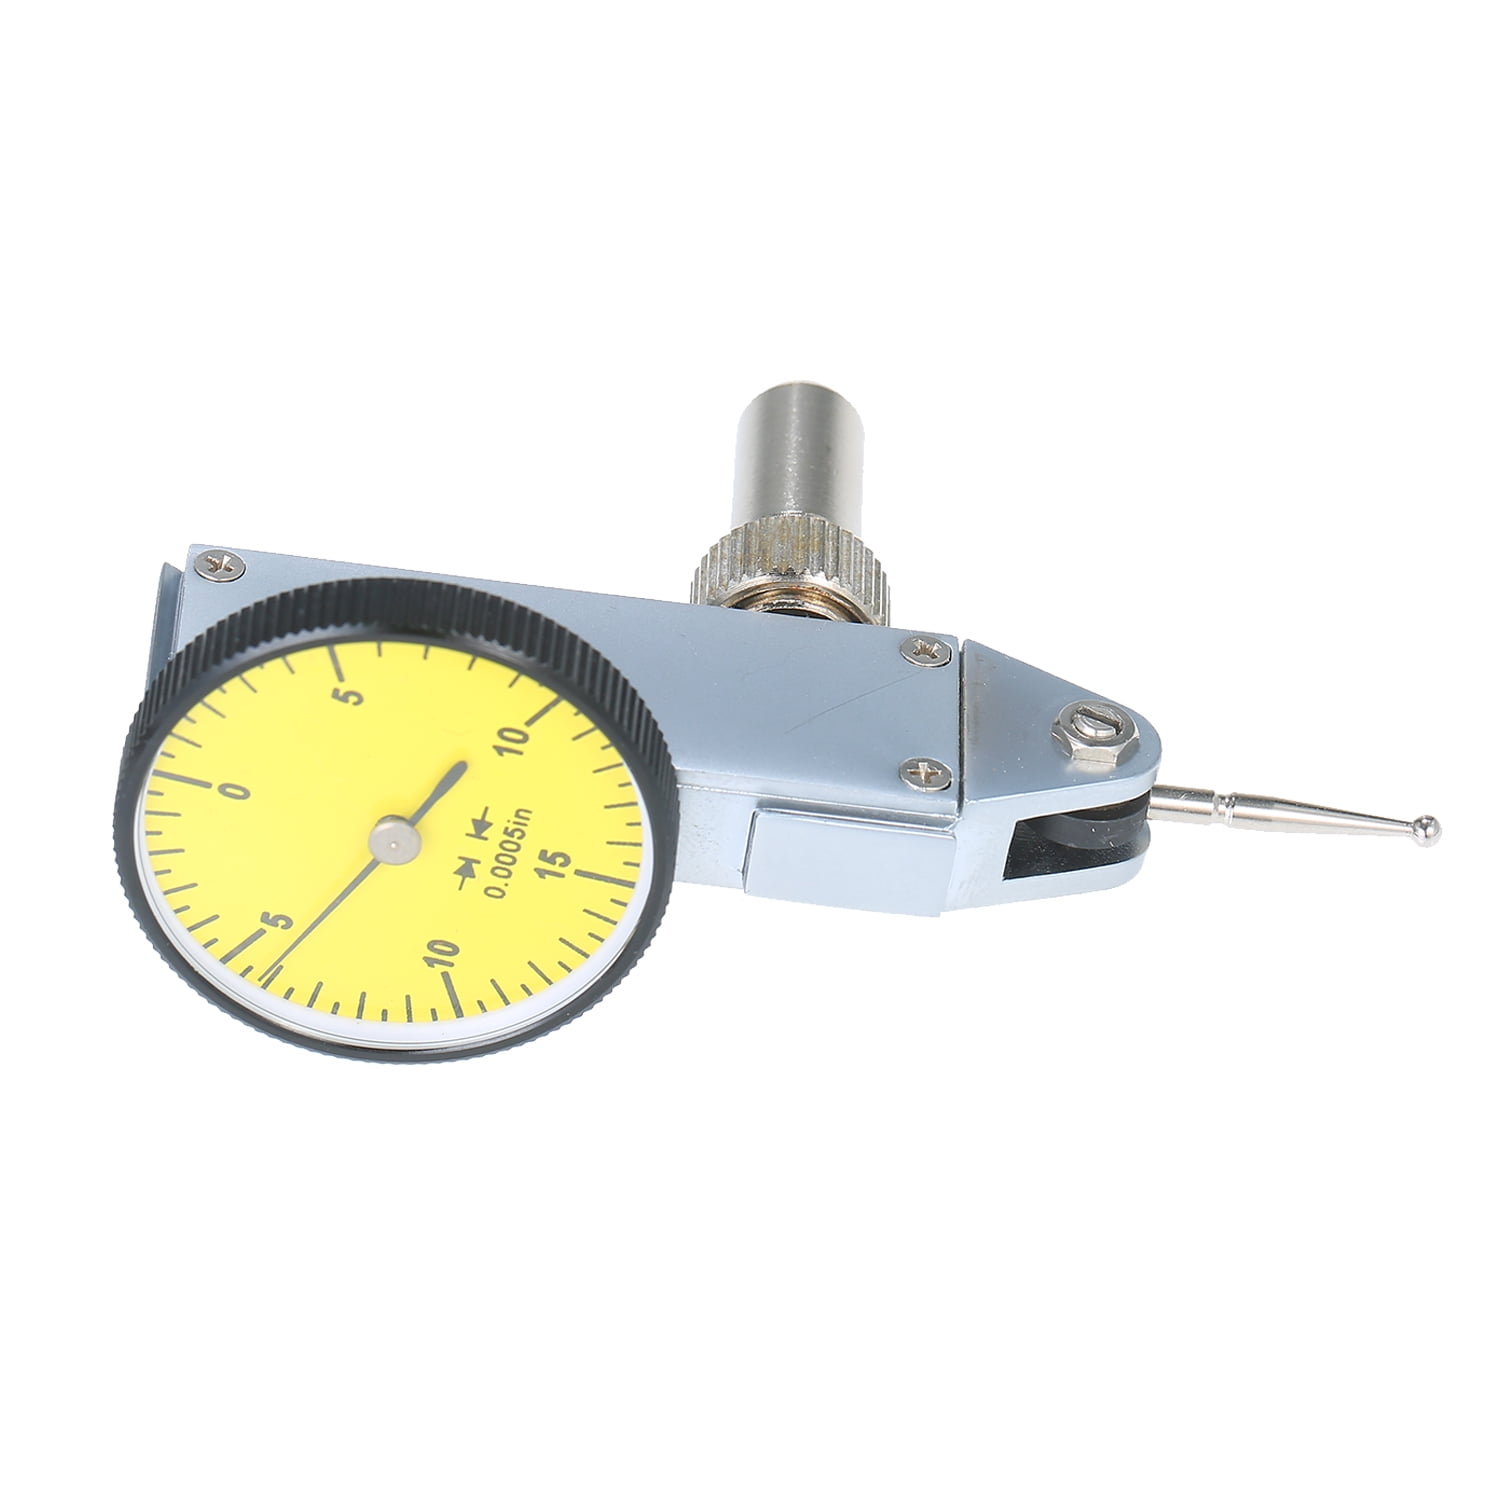 Yellow New Precision 0.030" Test Indicator 0 0005" GR Dial Reading 0-15-0 